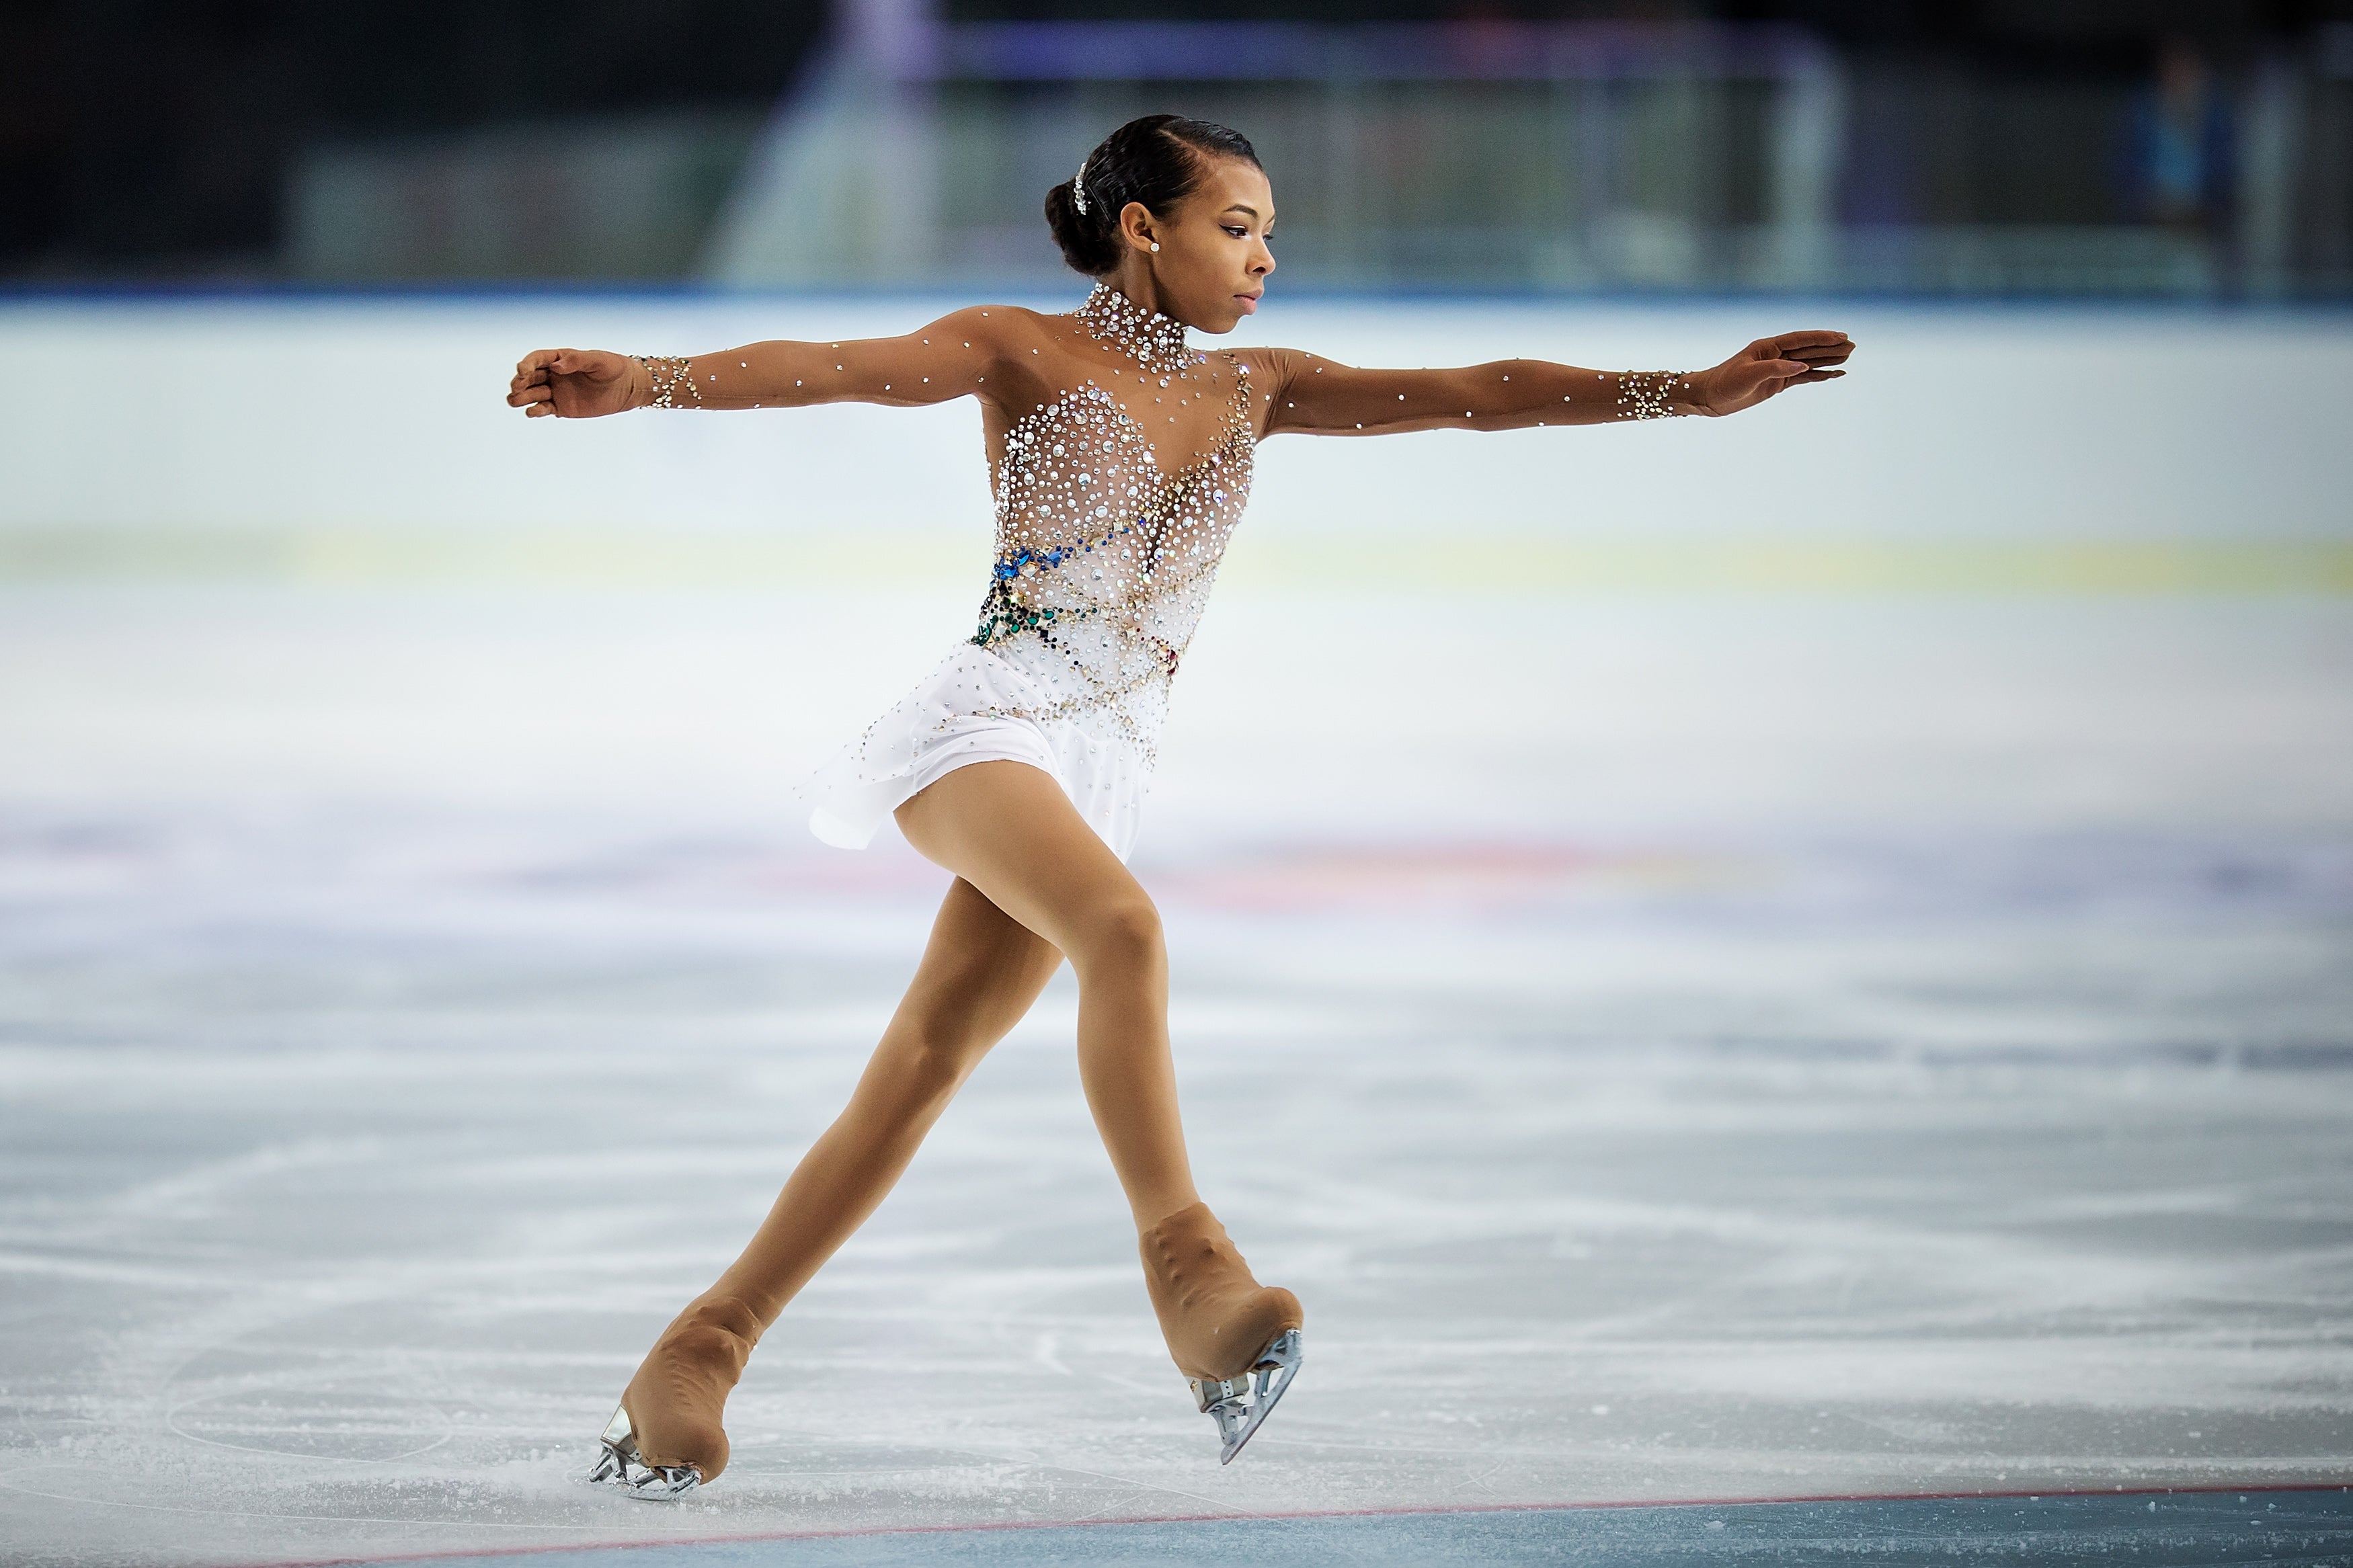 Teen Figure Skater Covers Whitney Houston’s 'One Moment In Time' During National Championship Routine
